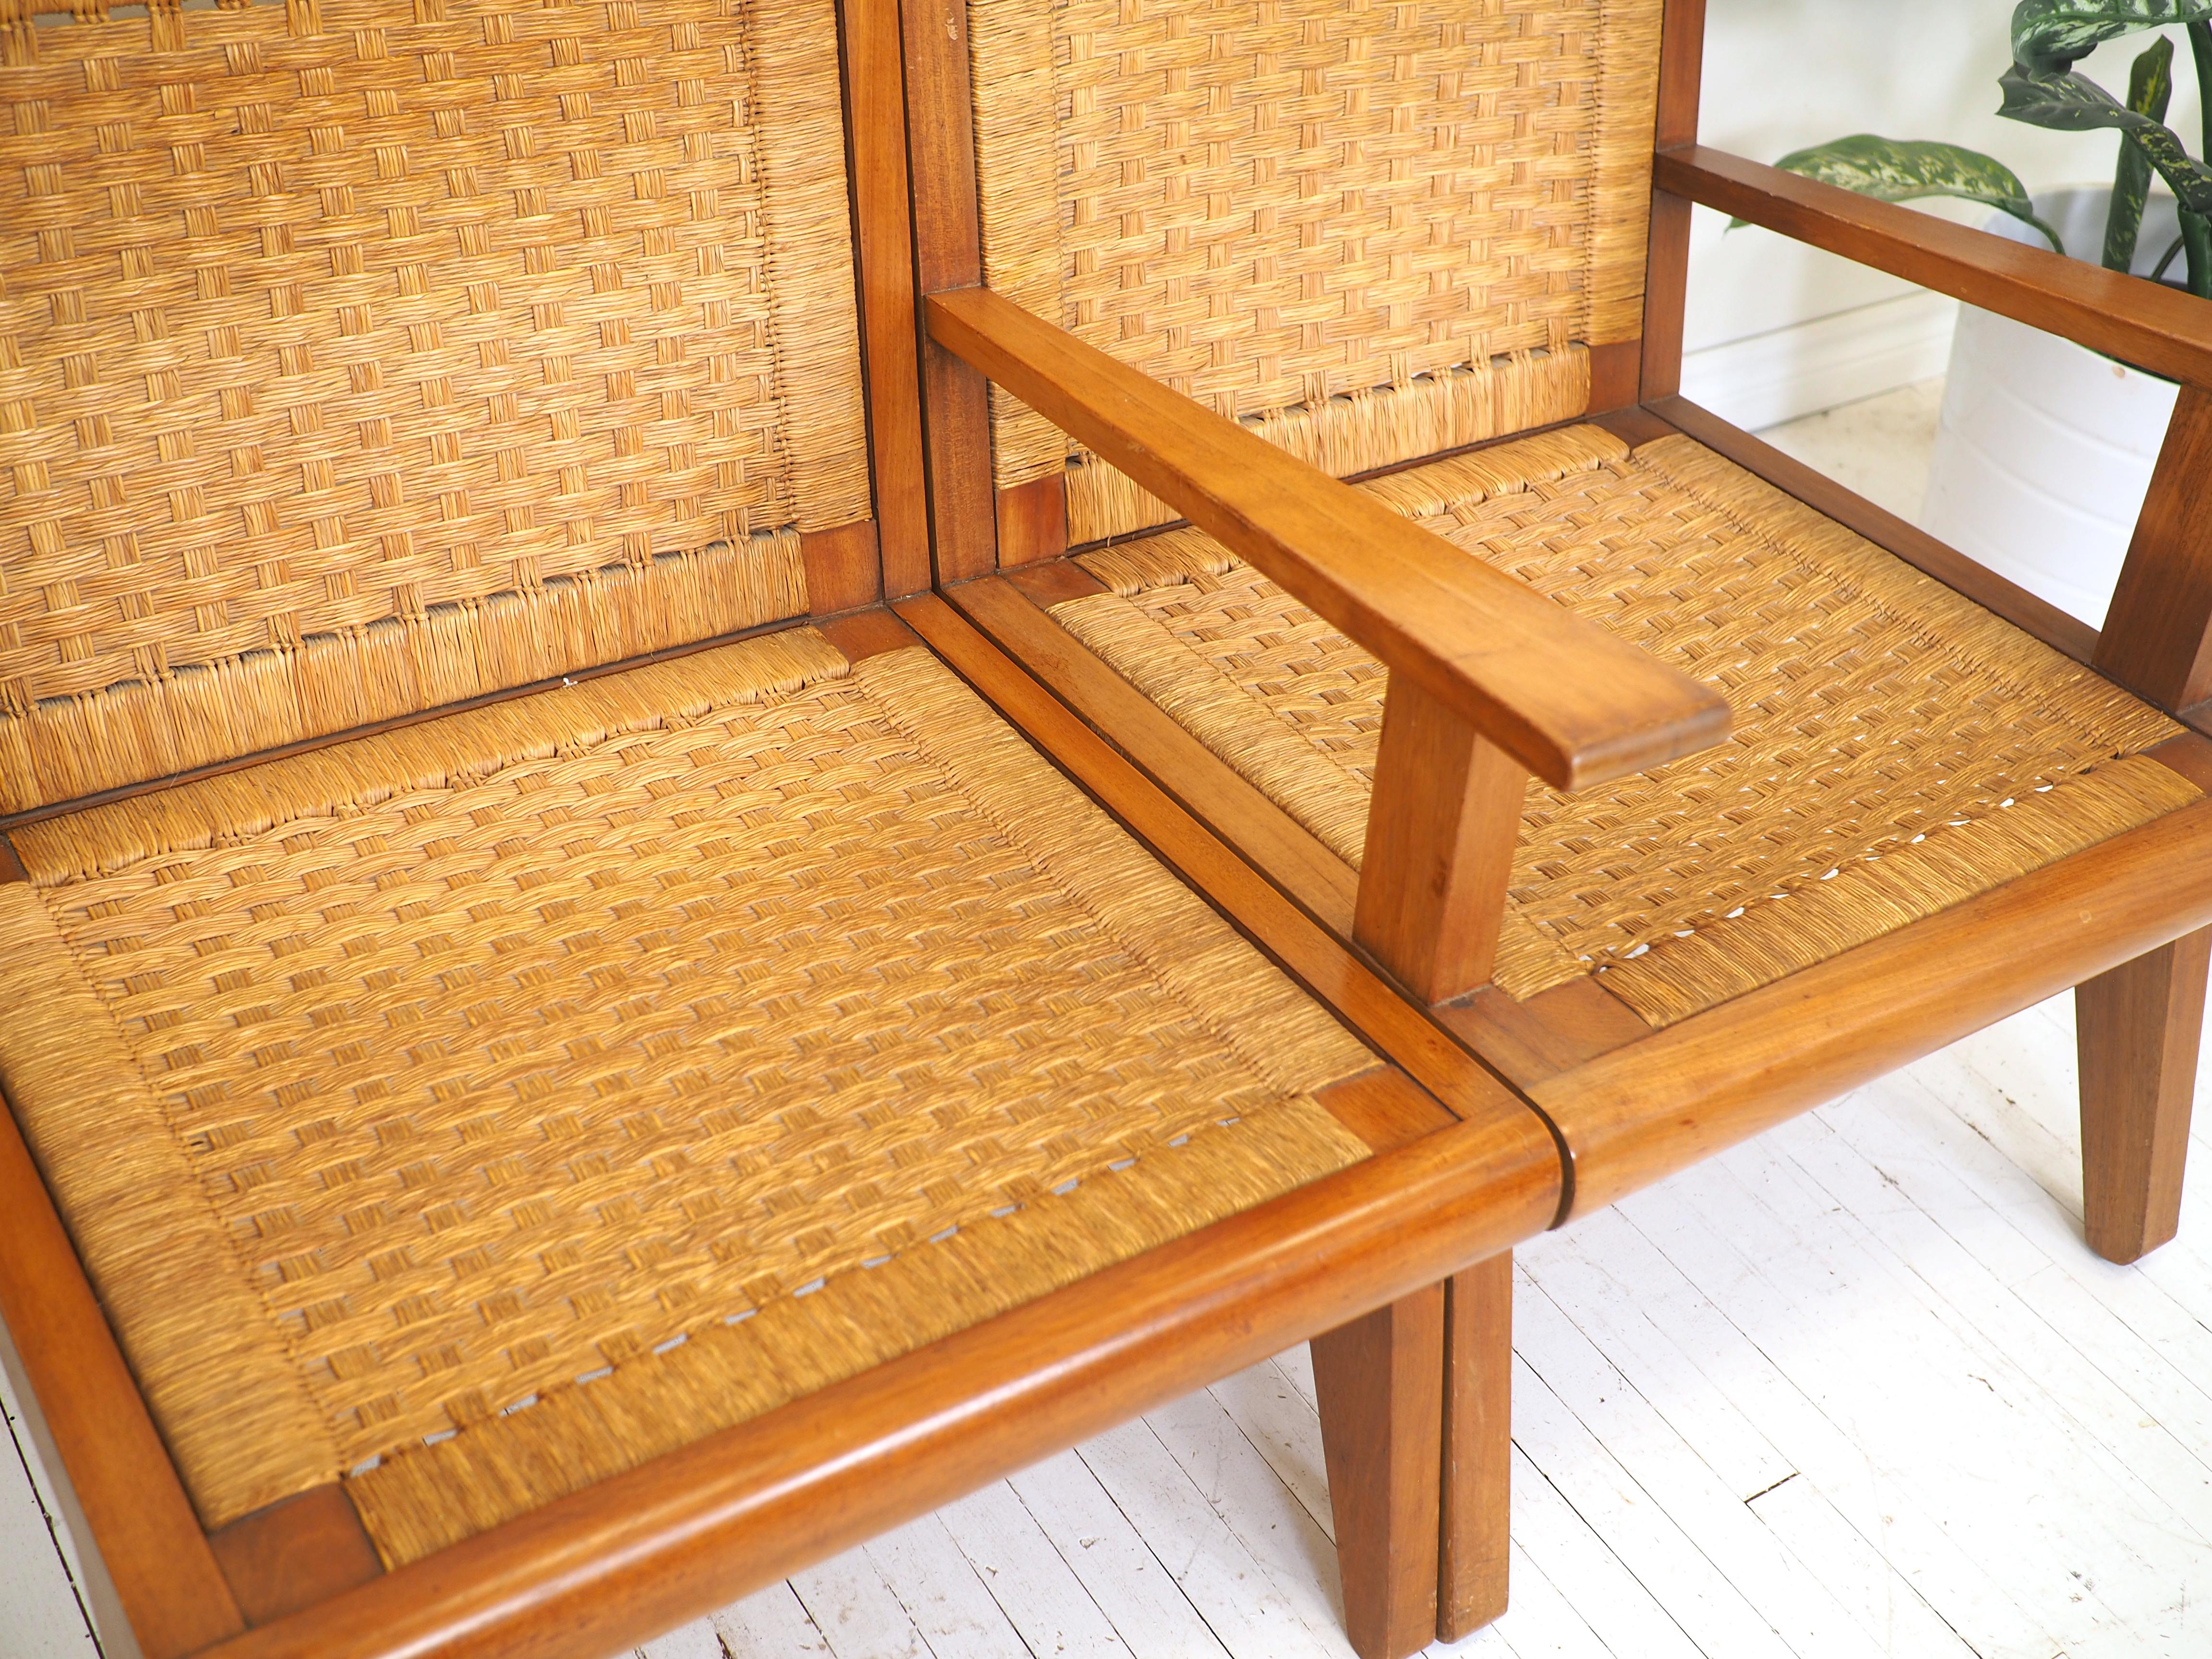 Beautiful pair of Mexican midcentury chairs with woven seats, made by Florida Muebles in Toluca, Mexico. 

Original owner attests to purchasing these in Mexico city in the late 1950s. They are strongly reminiscent of the Bauhaus-inspired designs